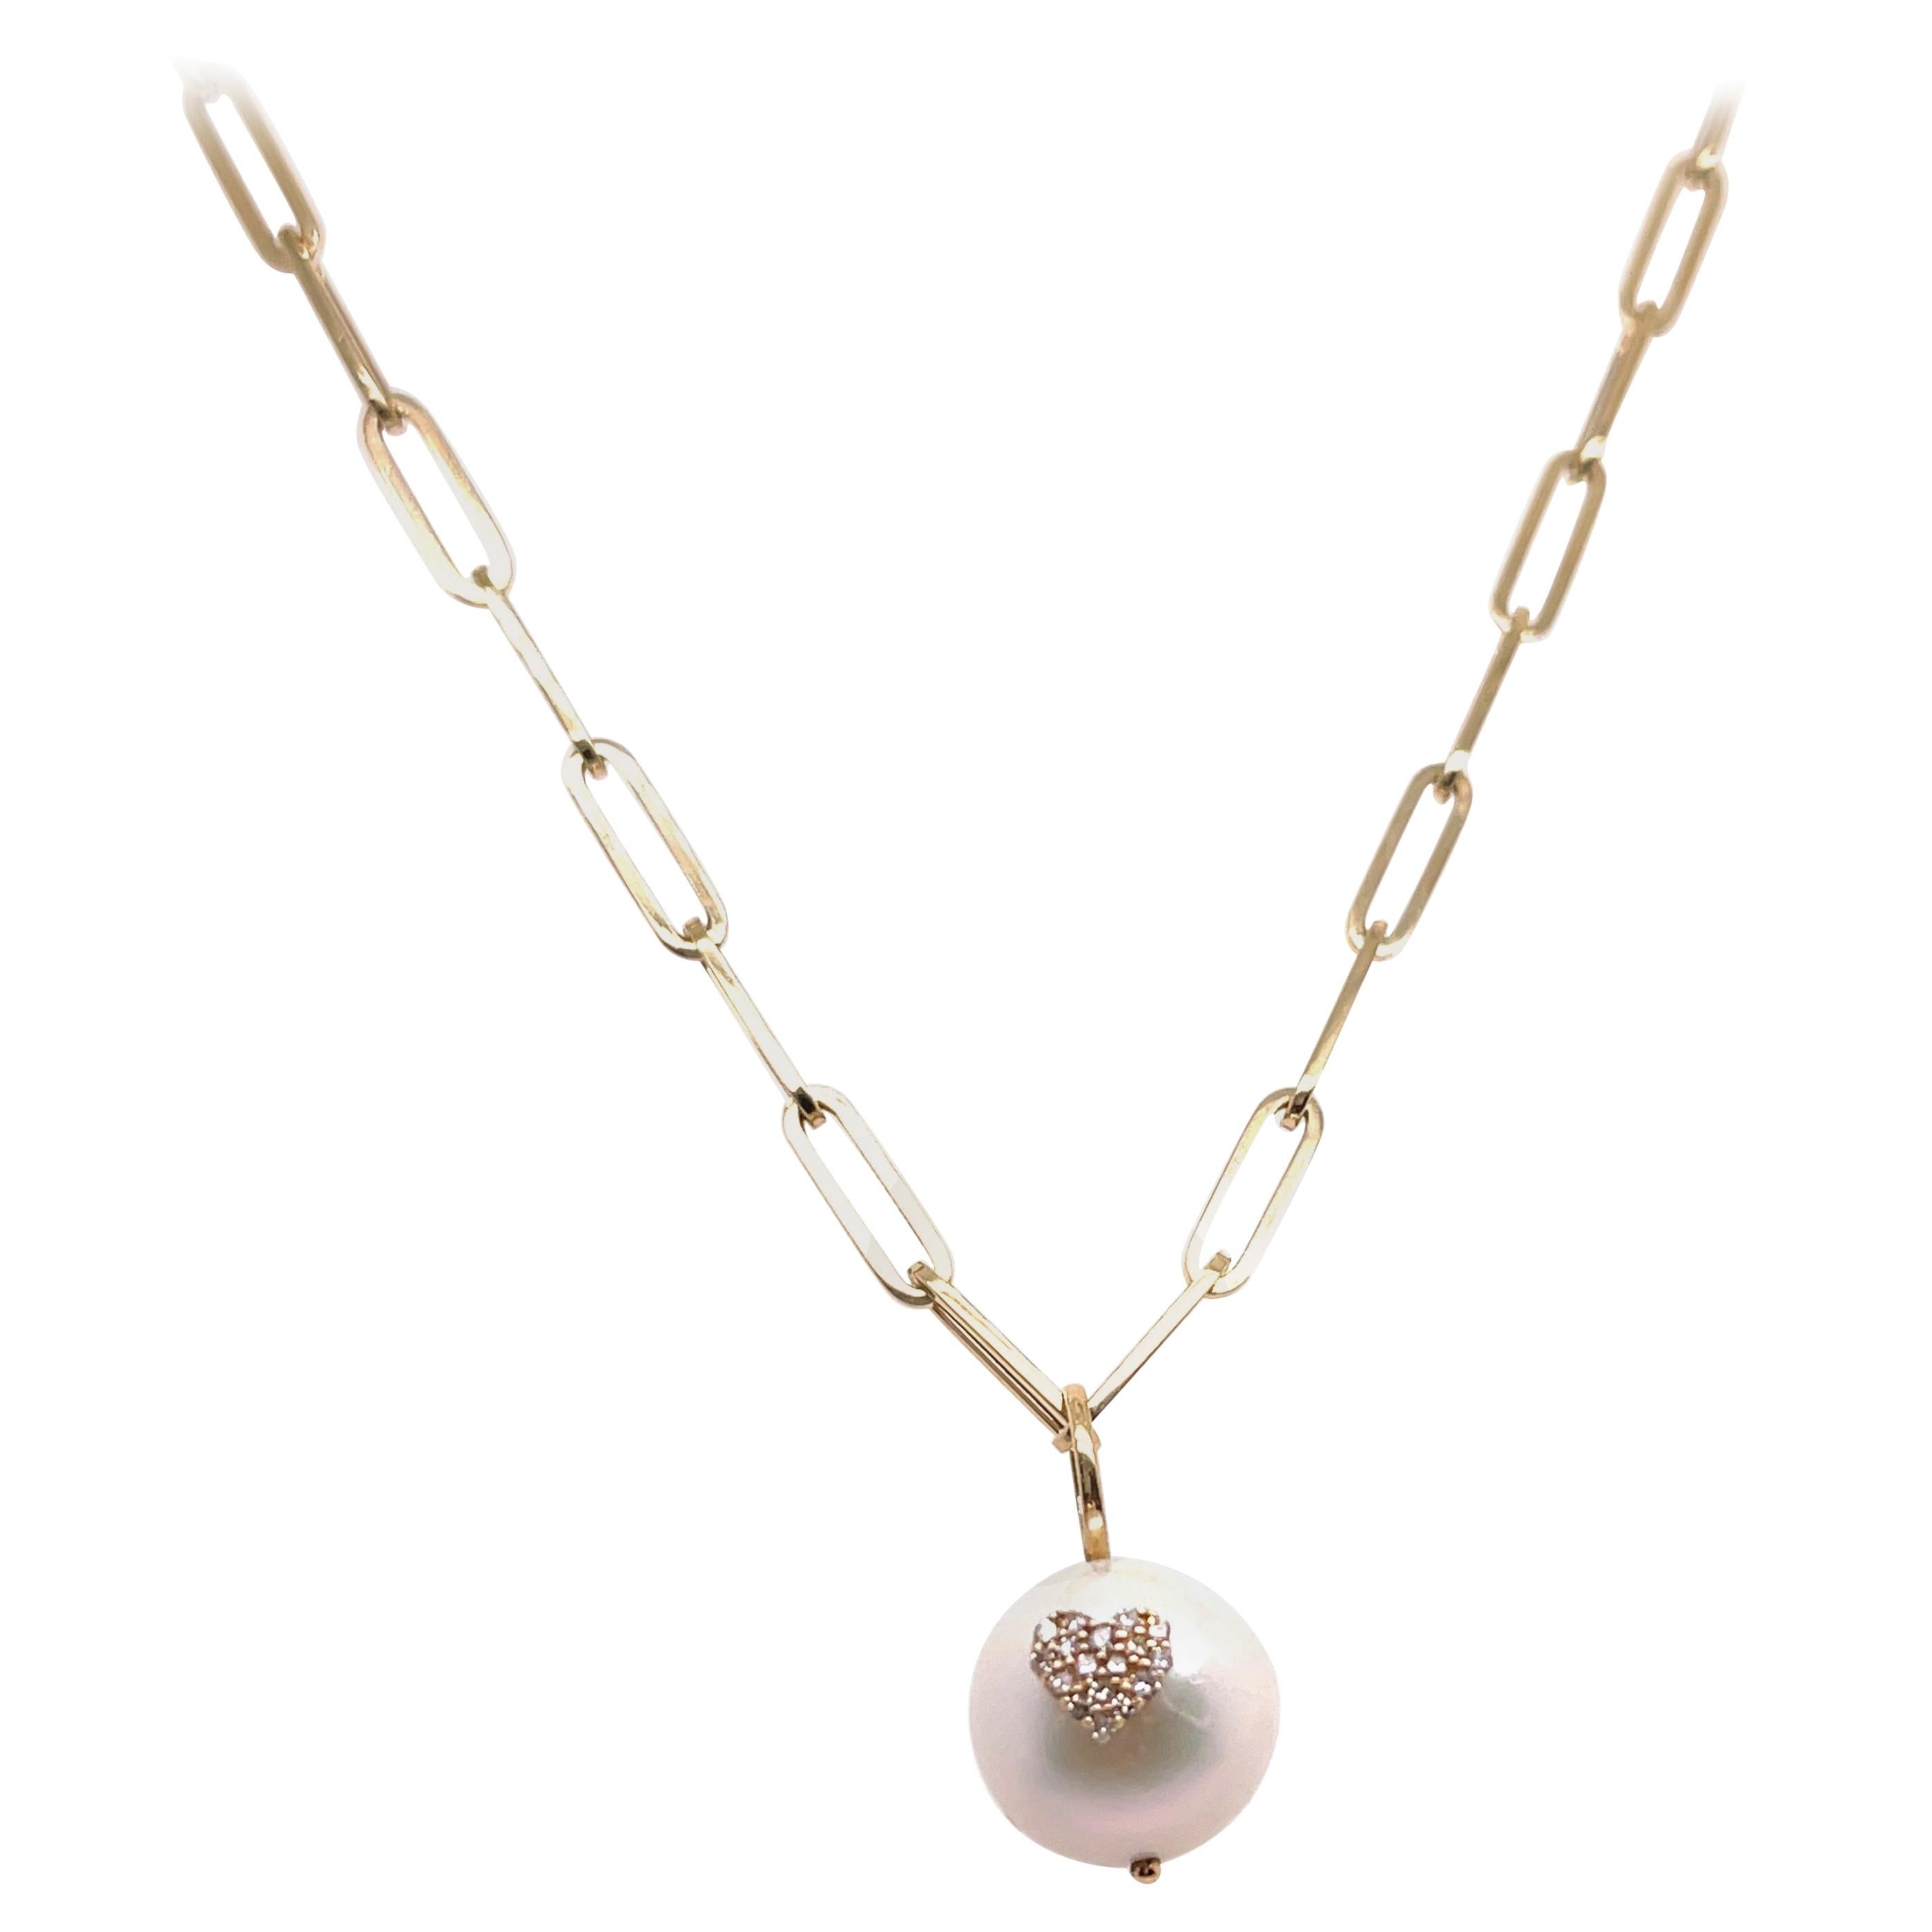 Gold Link Chain with Pearl Heart Charm Pendant